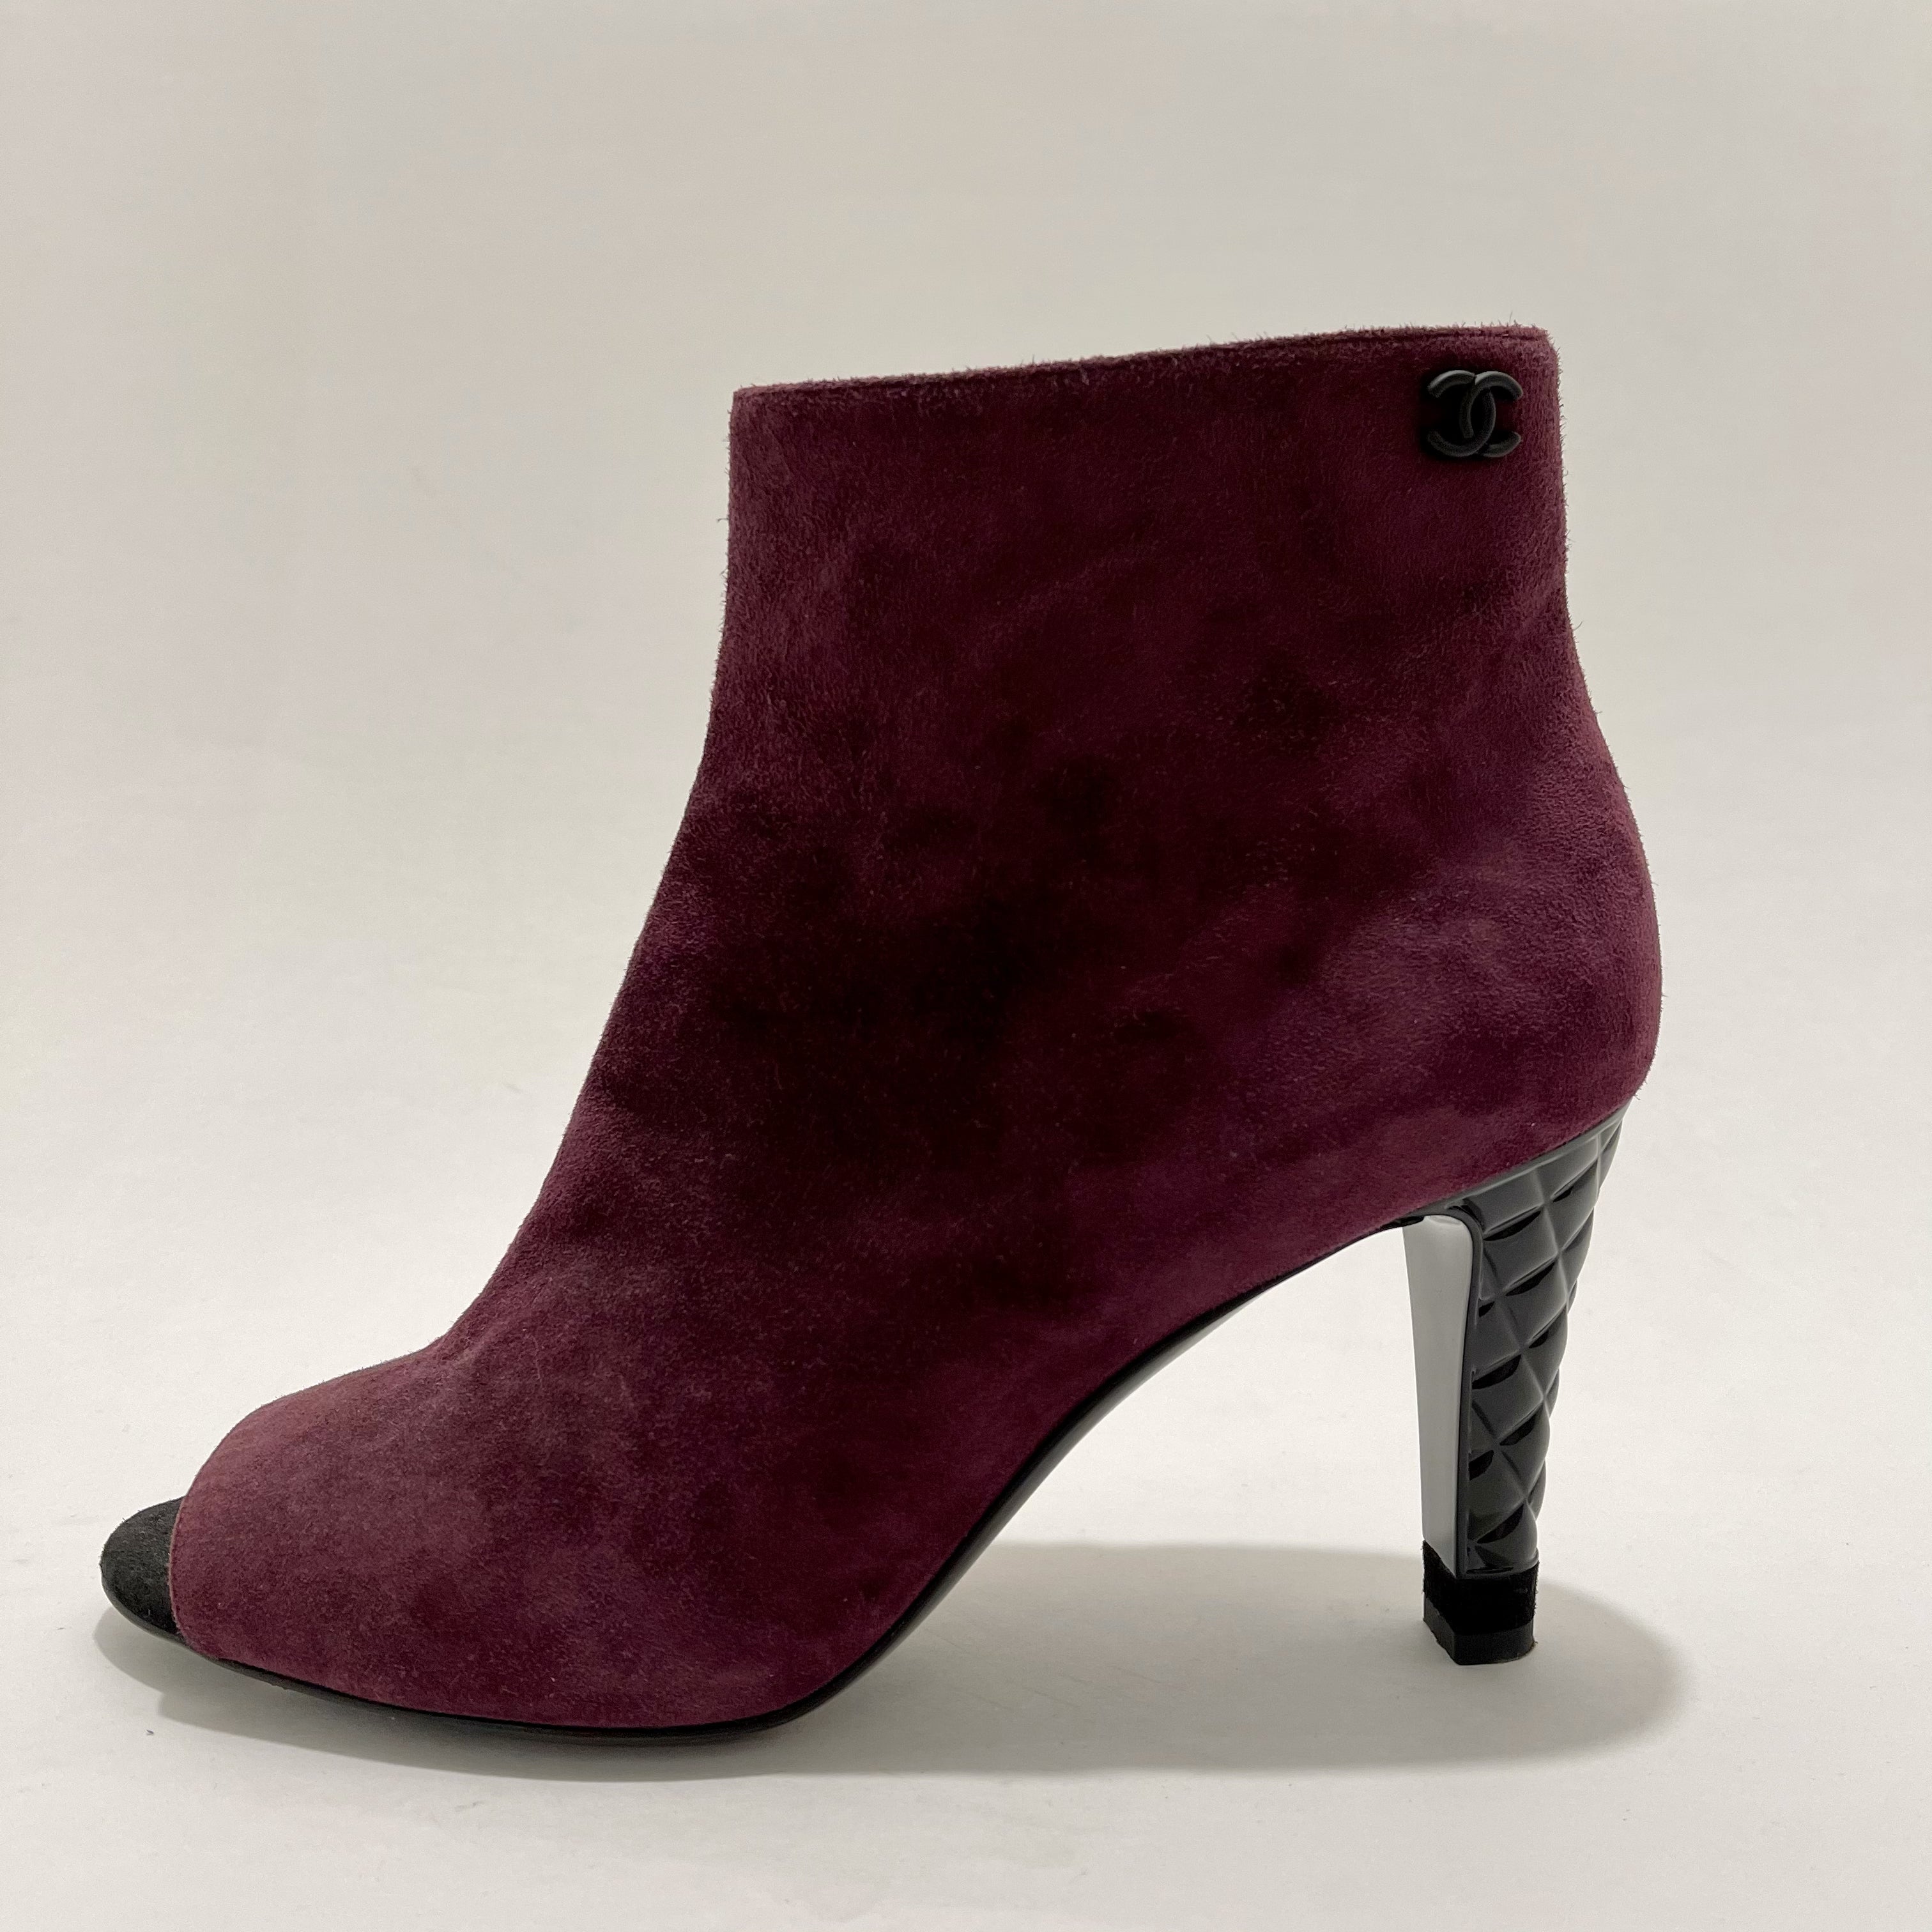 Chanel Burgundy Open-Toe Boots, Sz 39.5, US 9.5 – Cris Consignment